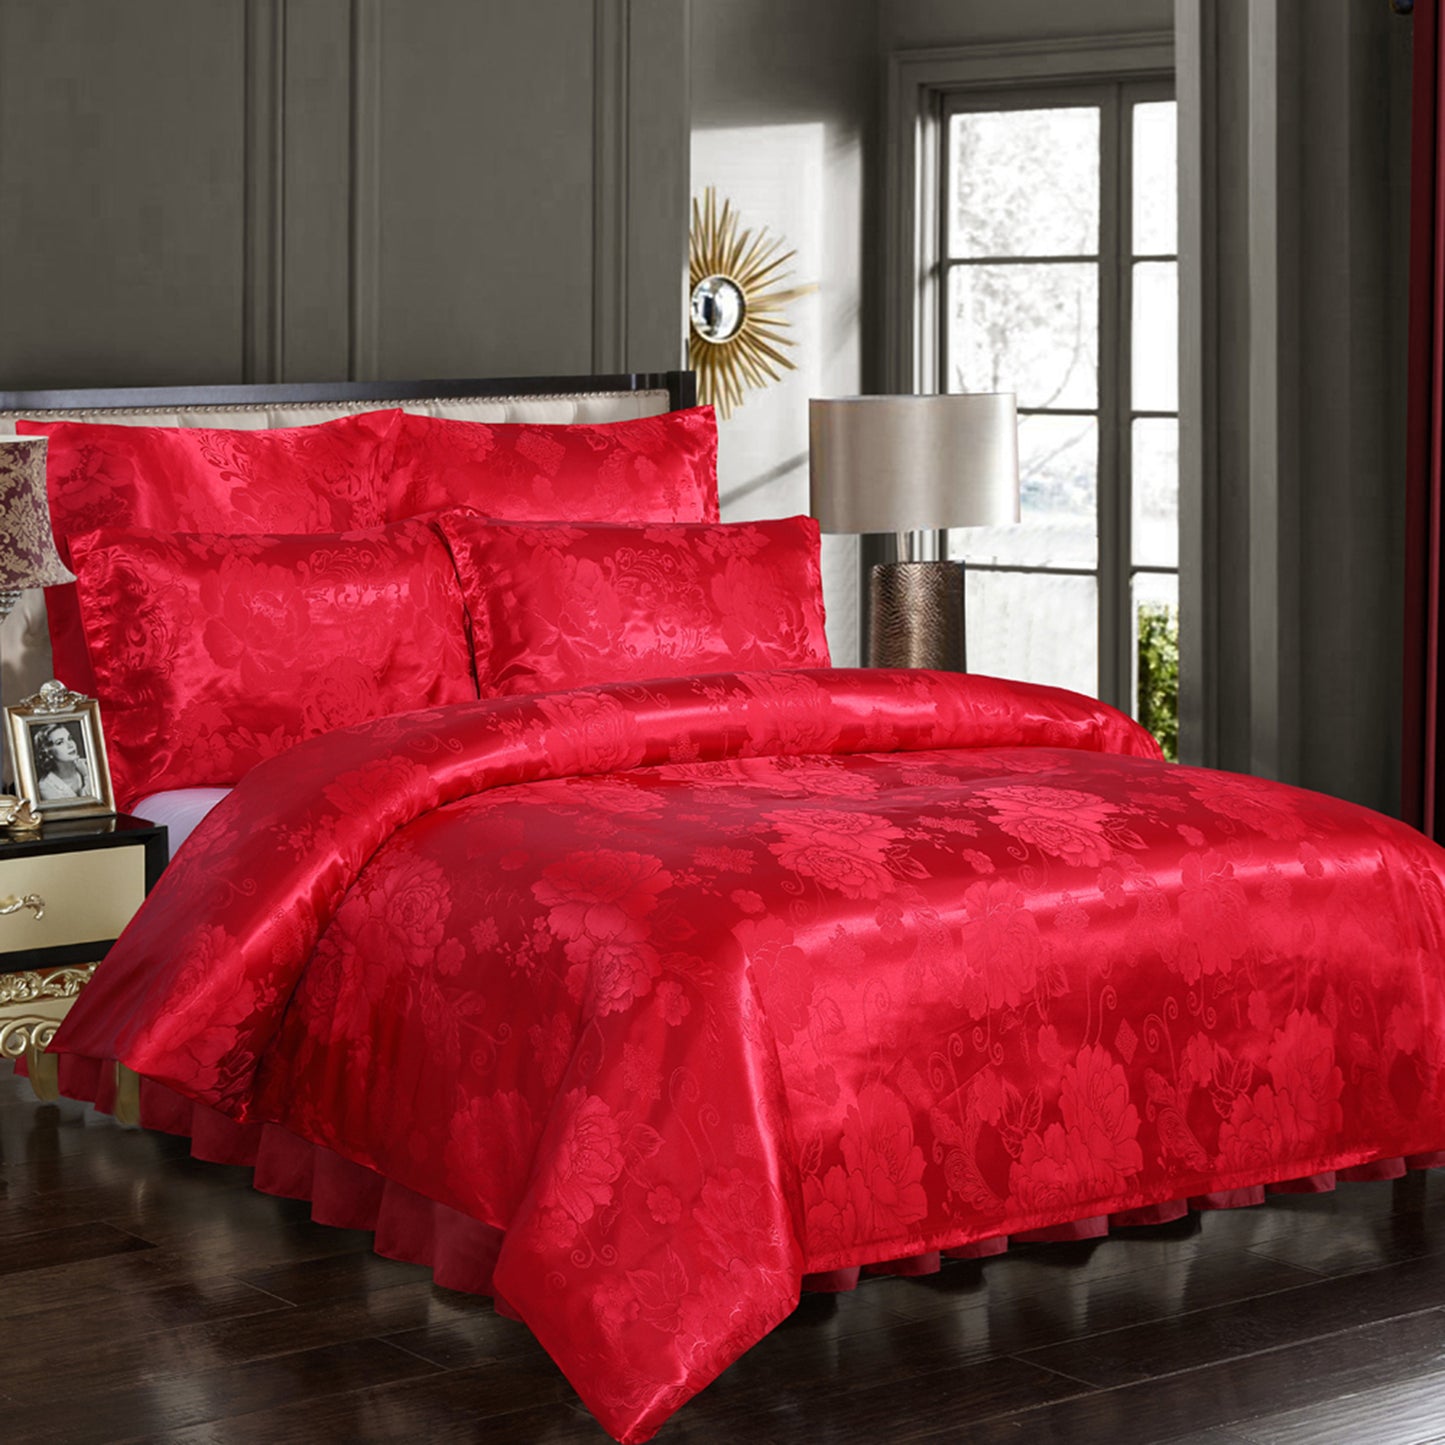 WONGS BEDDING Bright Red Embroidery Satin Craft Duvet Cover Set With 2 Pillow Case